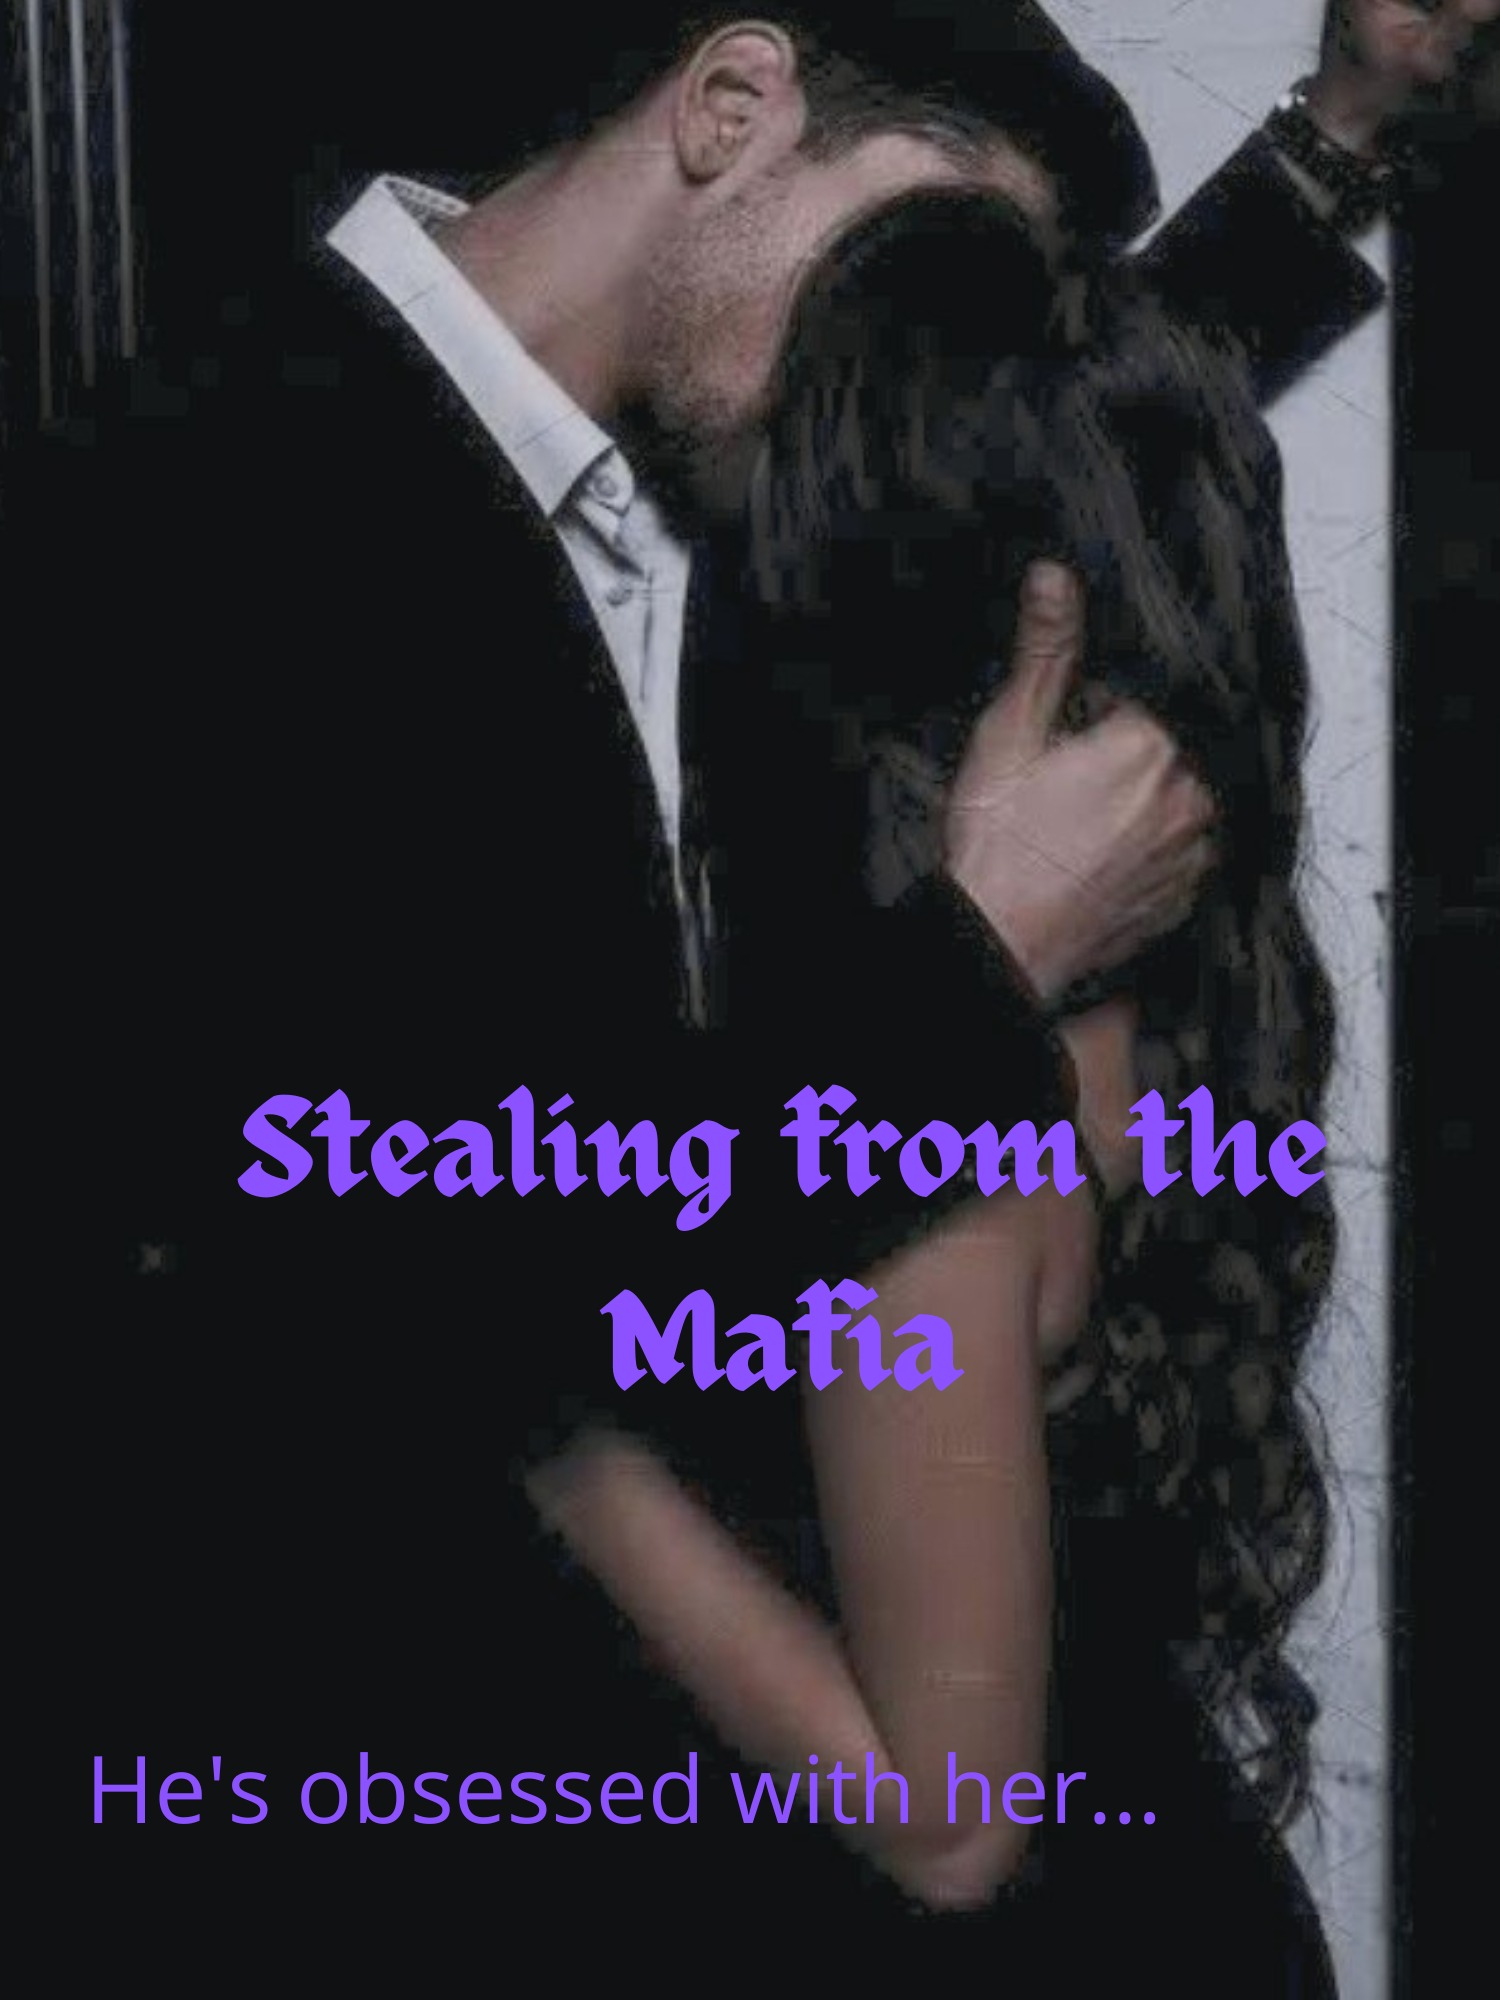 Stealing from the Mafia